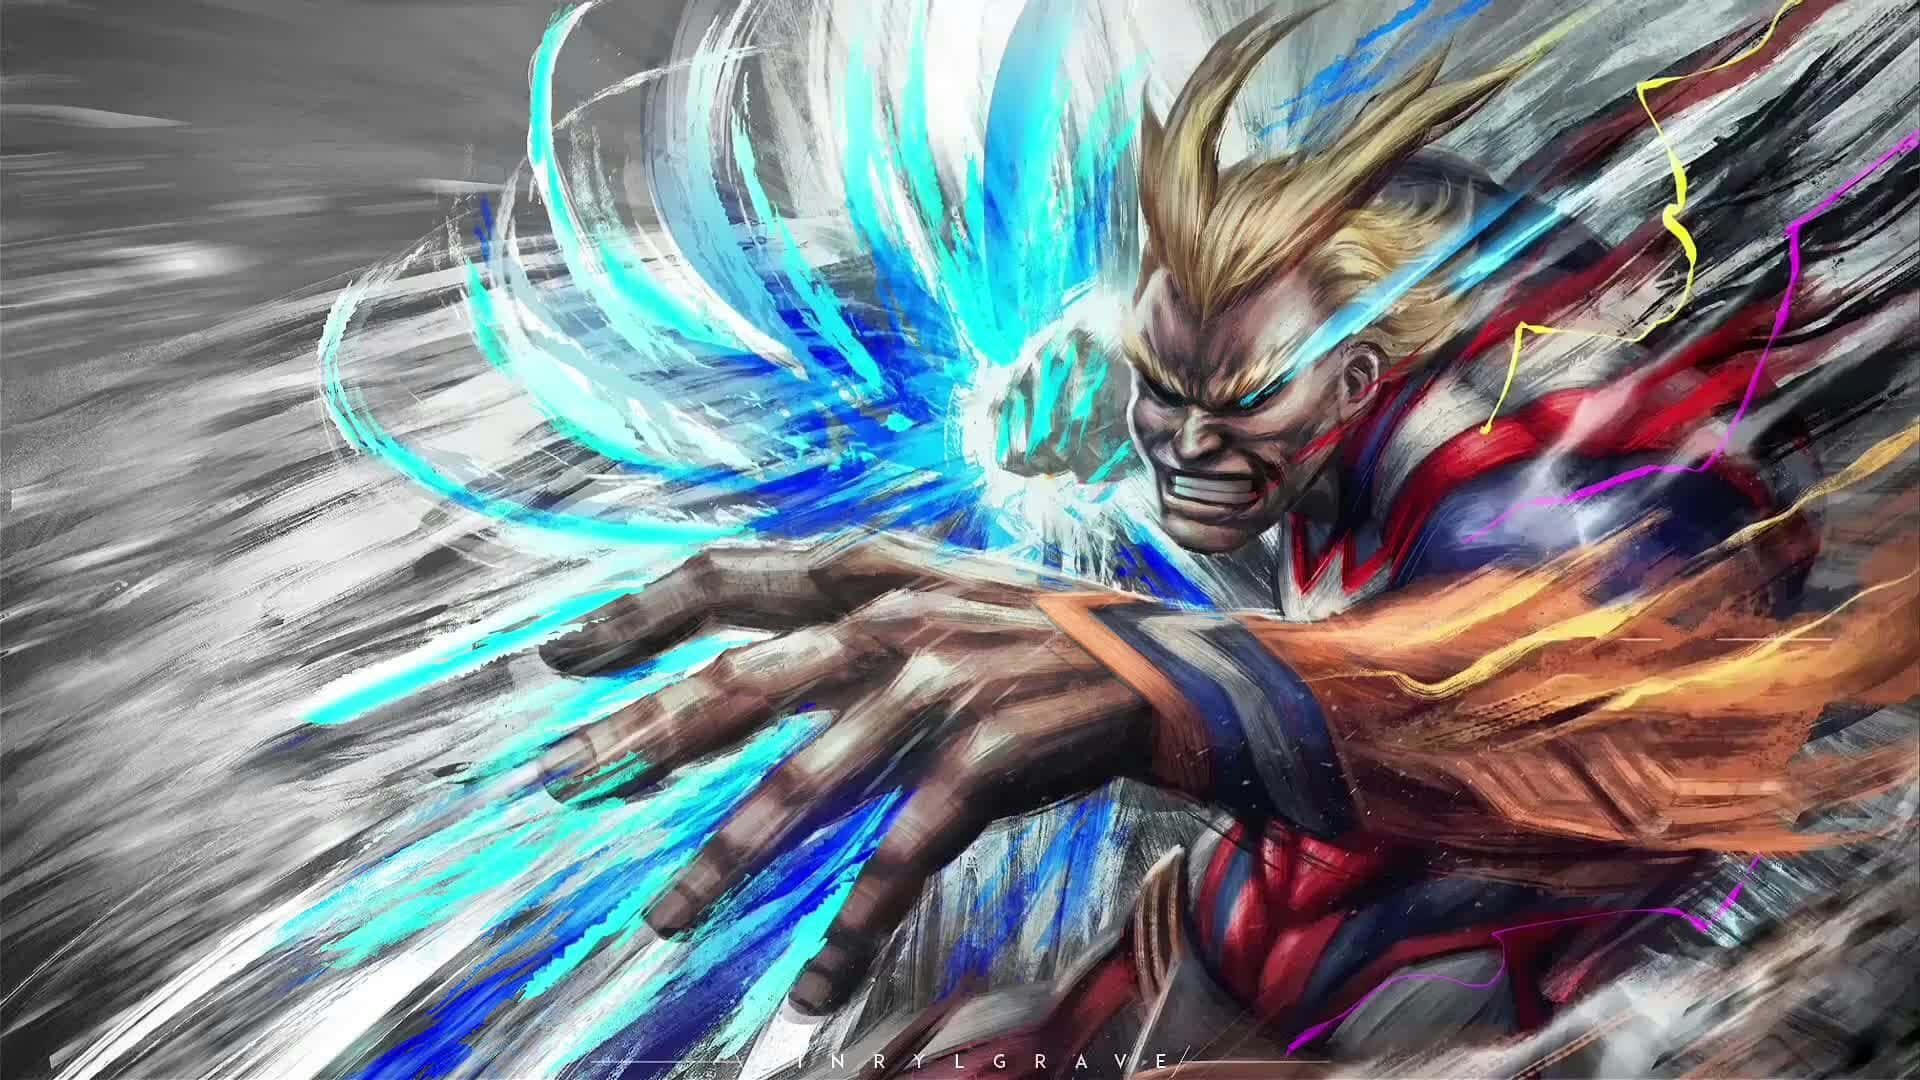 The hero we need - All Might